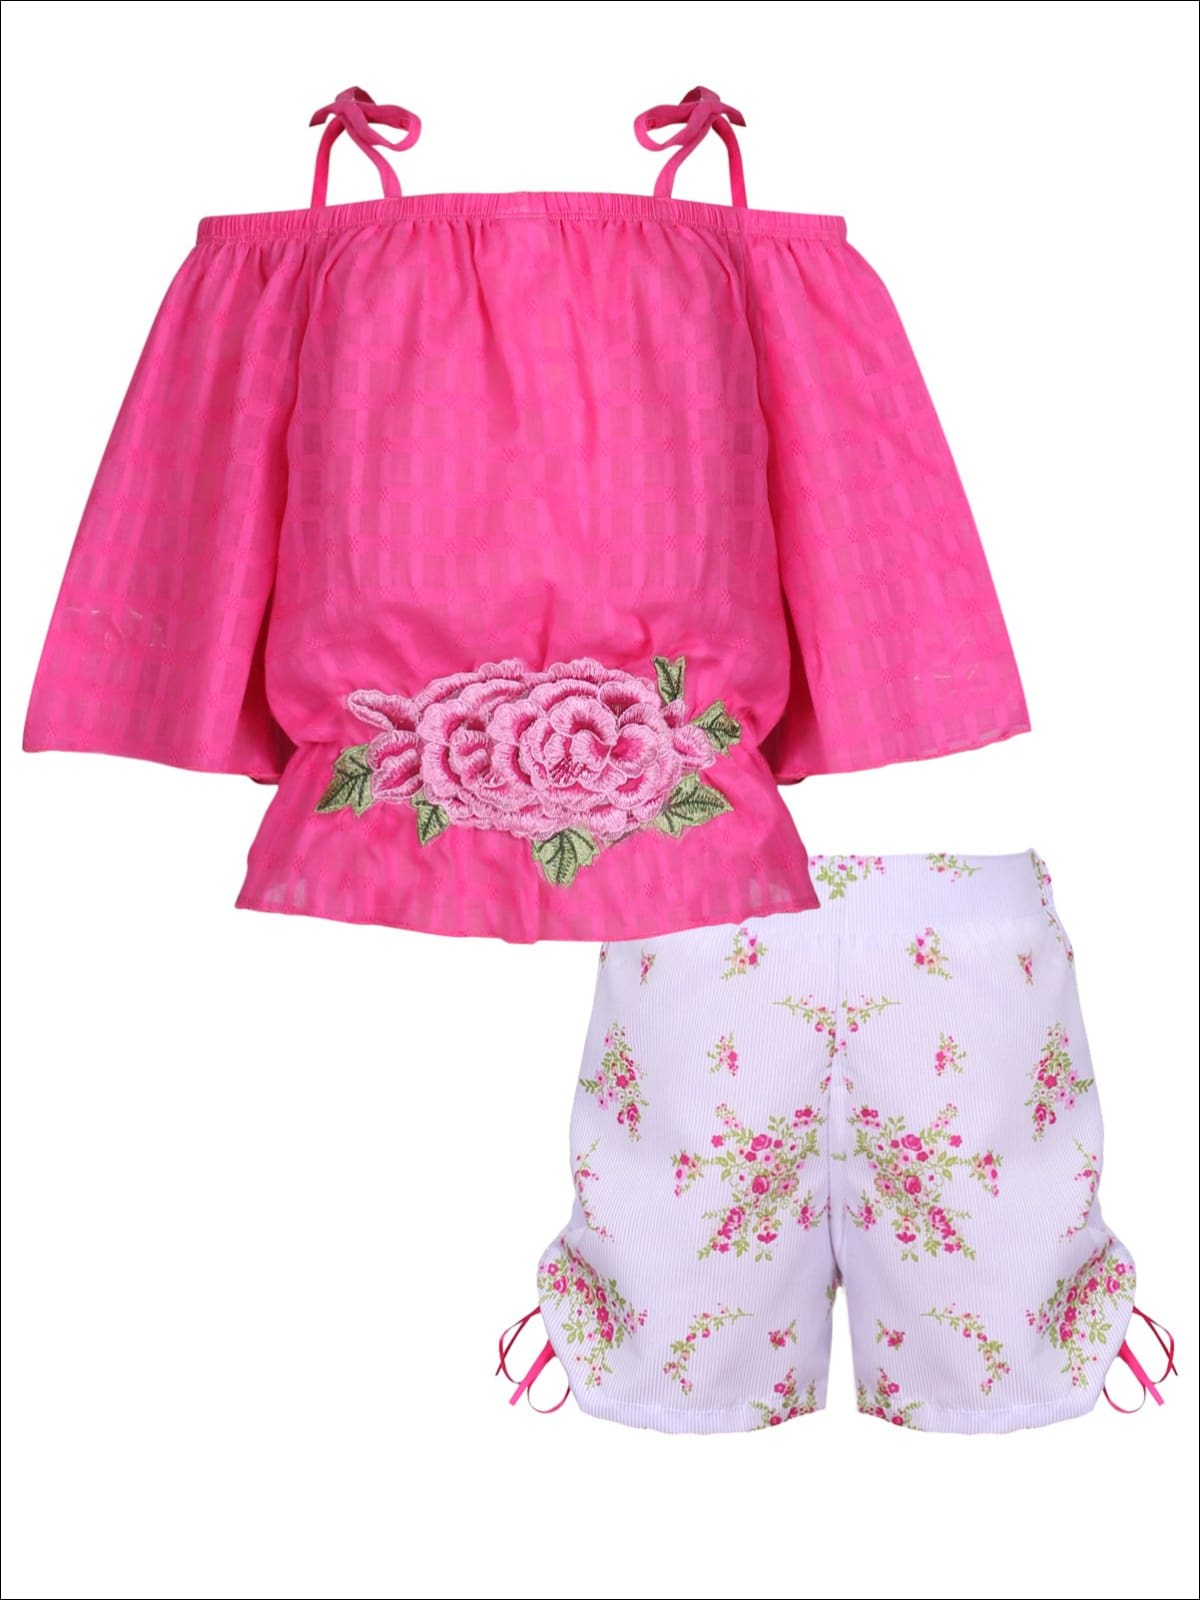 Girls Trimmed Off the Shoulder Strap Flare Sleeve Tunic & Drawstring Shorts Set - Fuchsia / 2T/3T - Girls Spring Casual Set